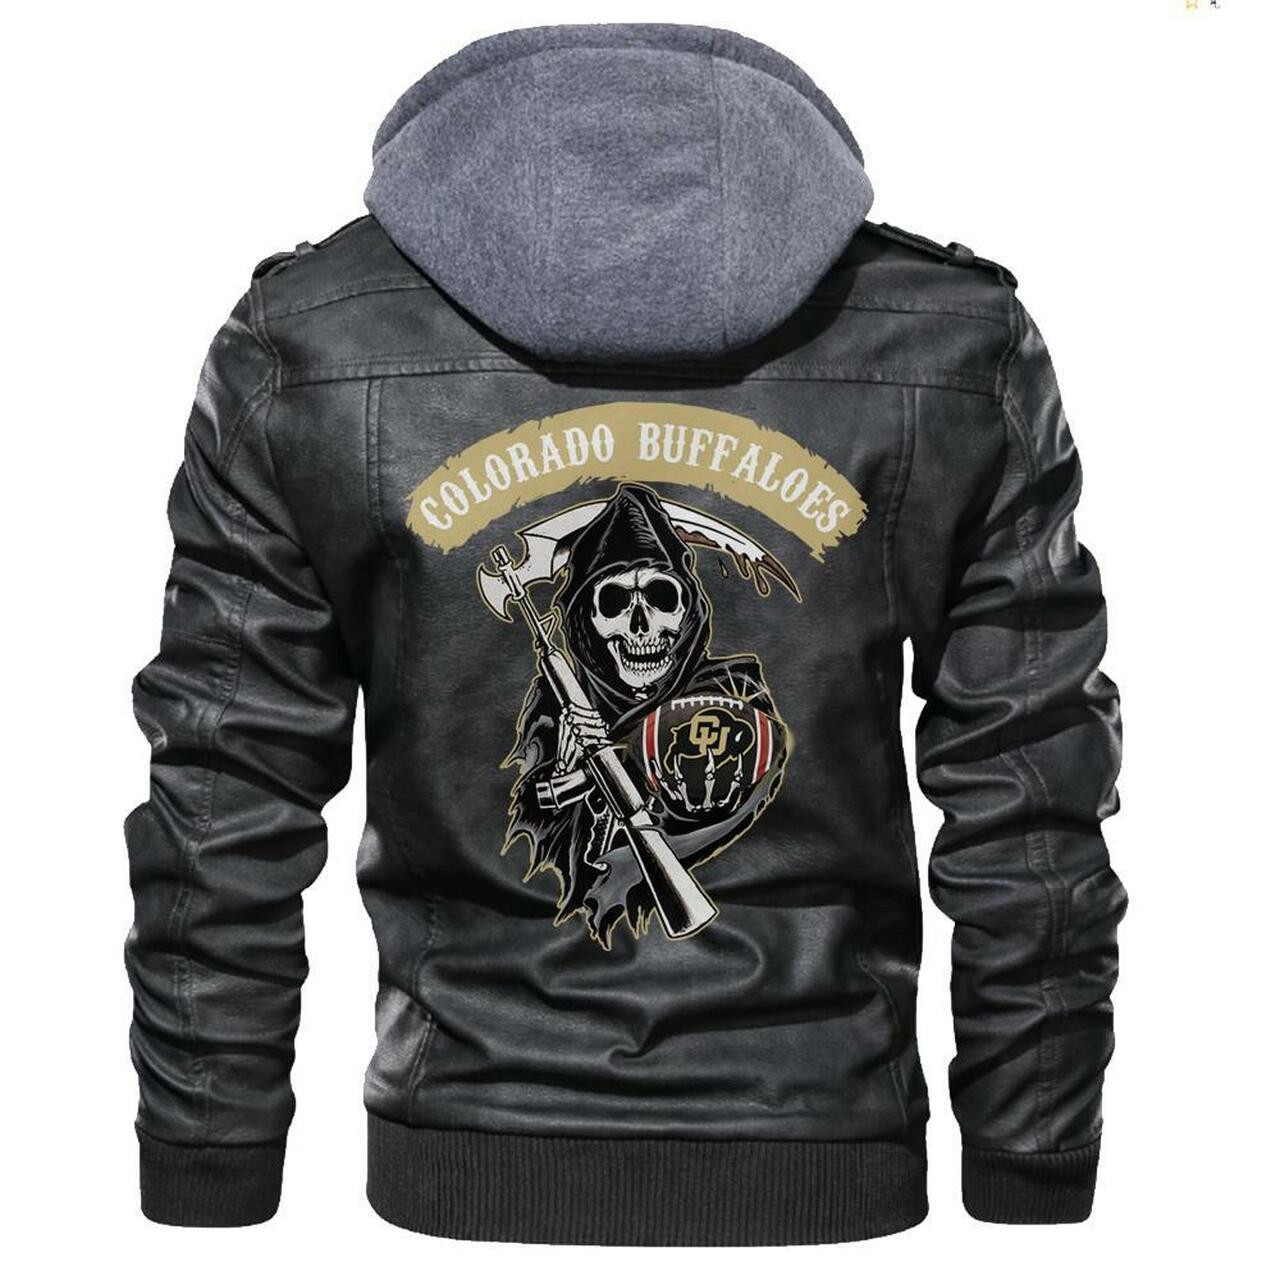 You can find Leather Jacket online at a great price 183